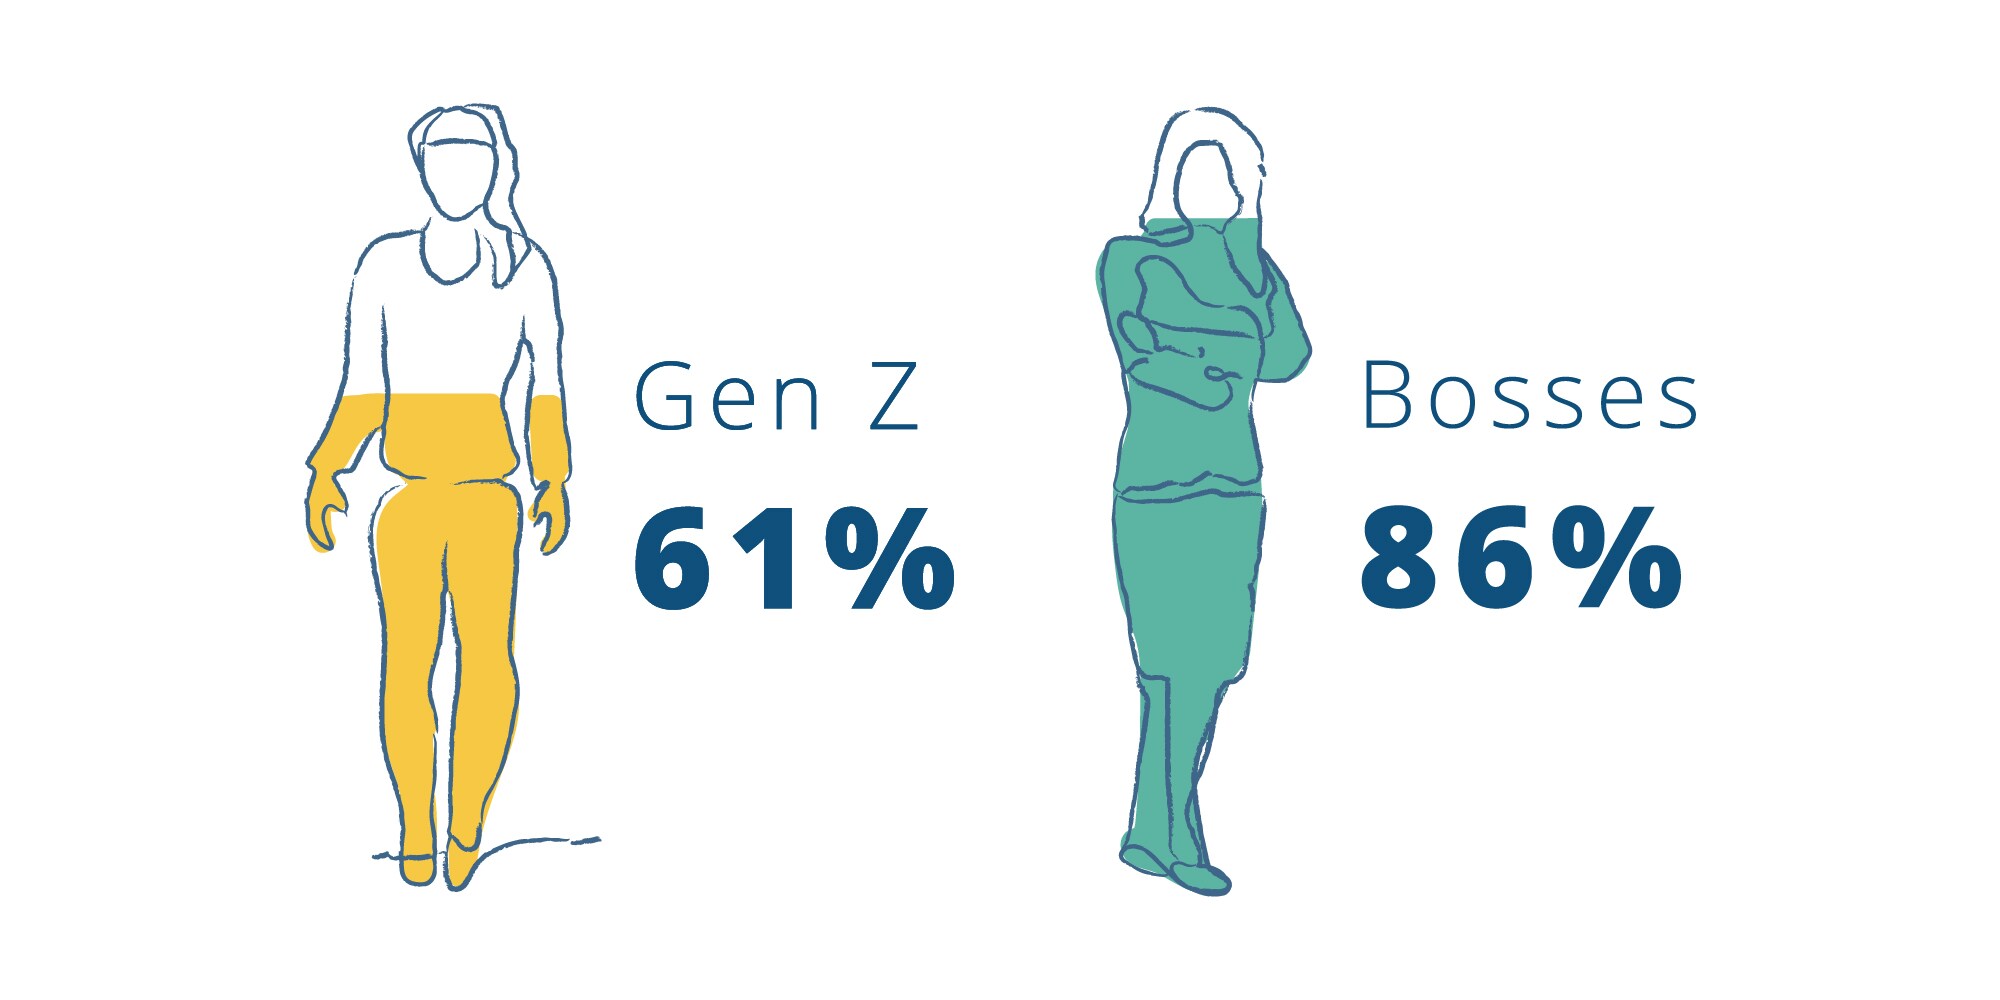 visual illustrating the disparity between how bosses and Gen Z appear in the work force. 